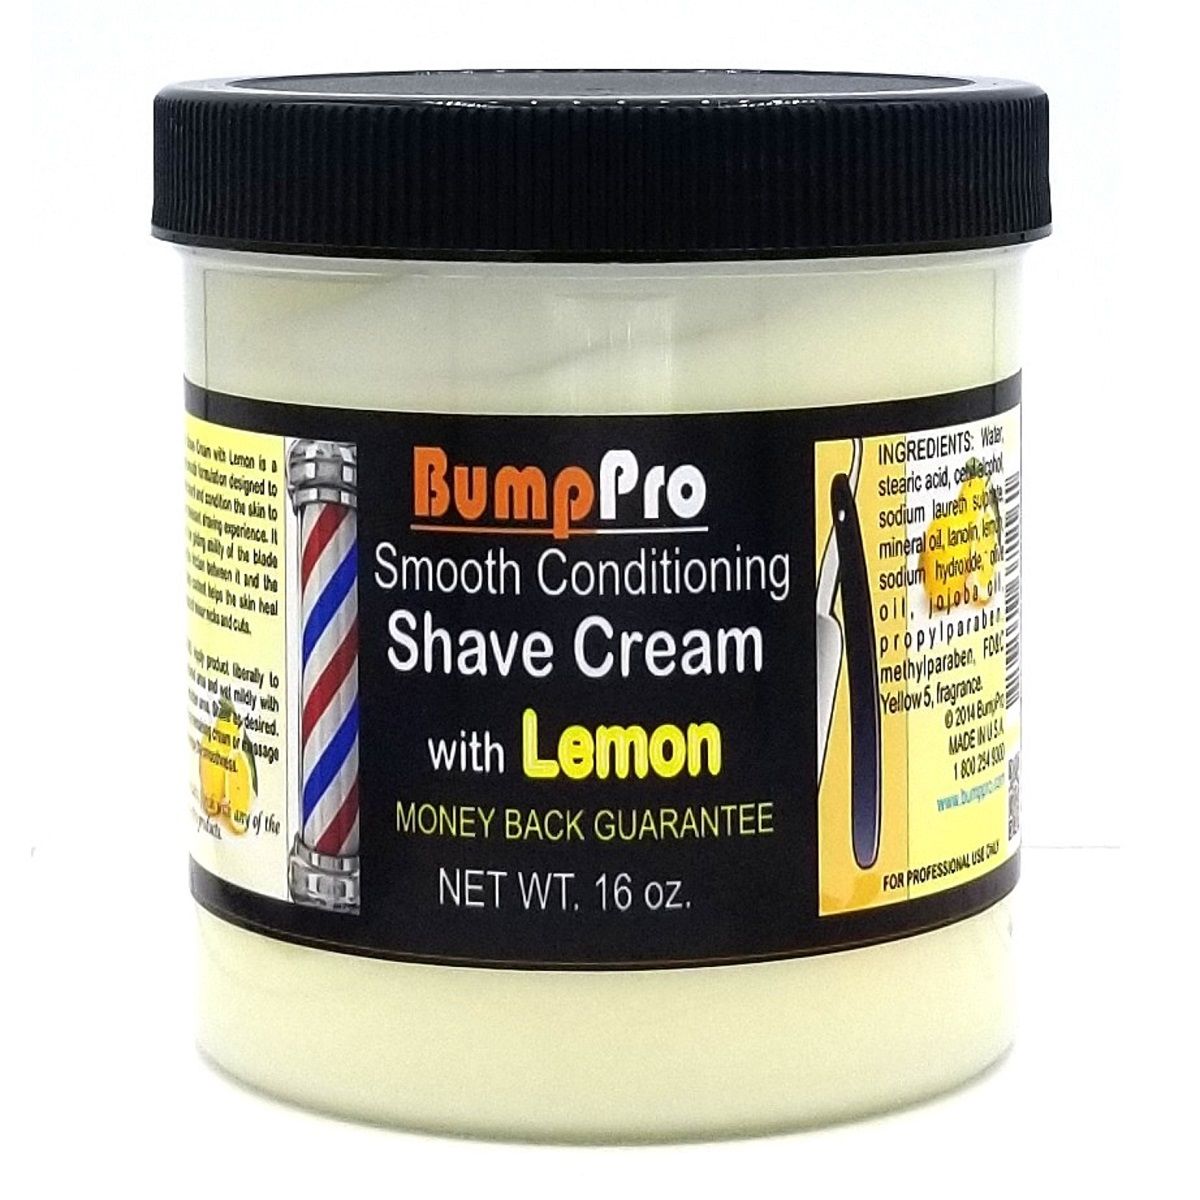 Bump Pro Smooth Conditioning Shave Cream with Lemon 16oz